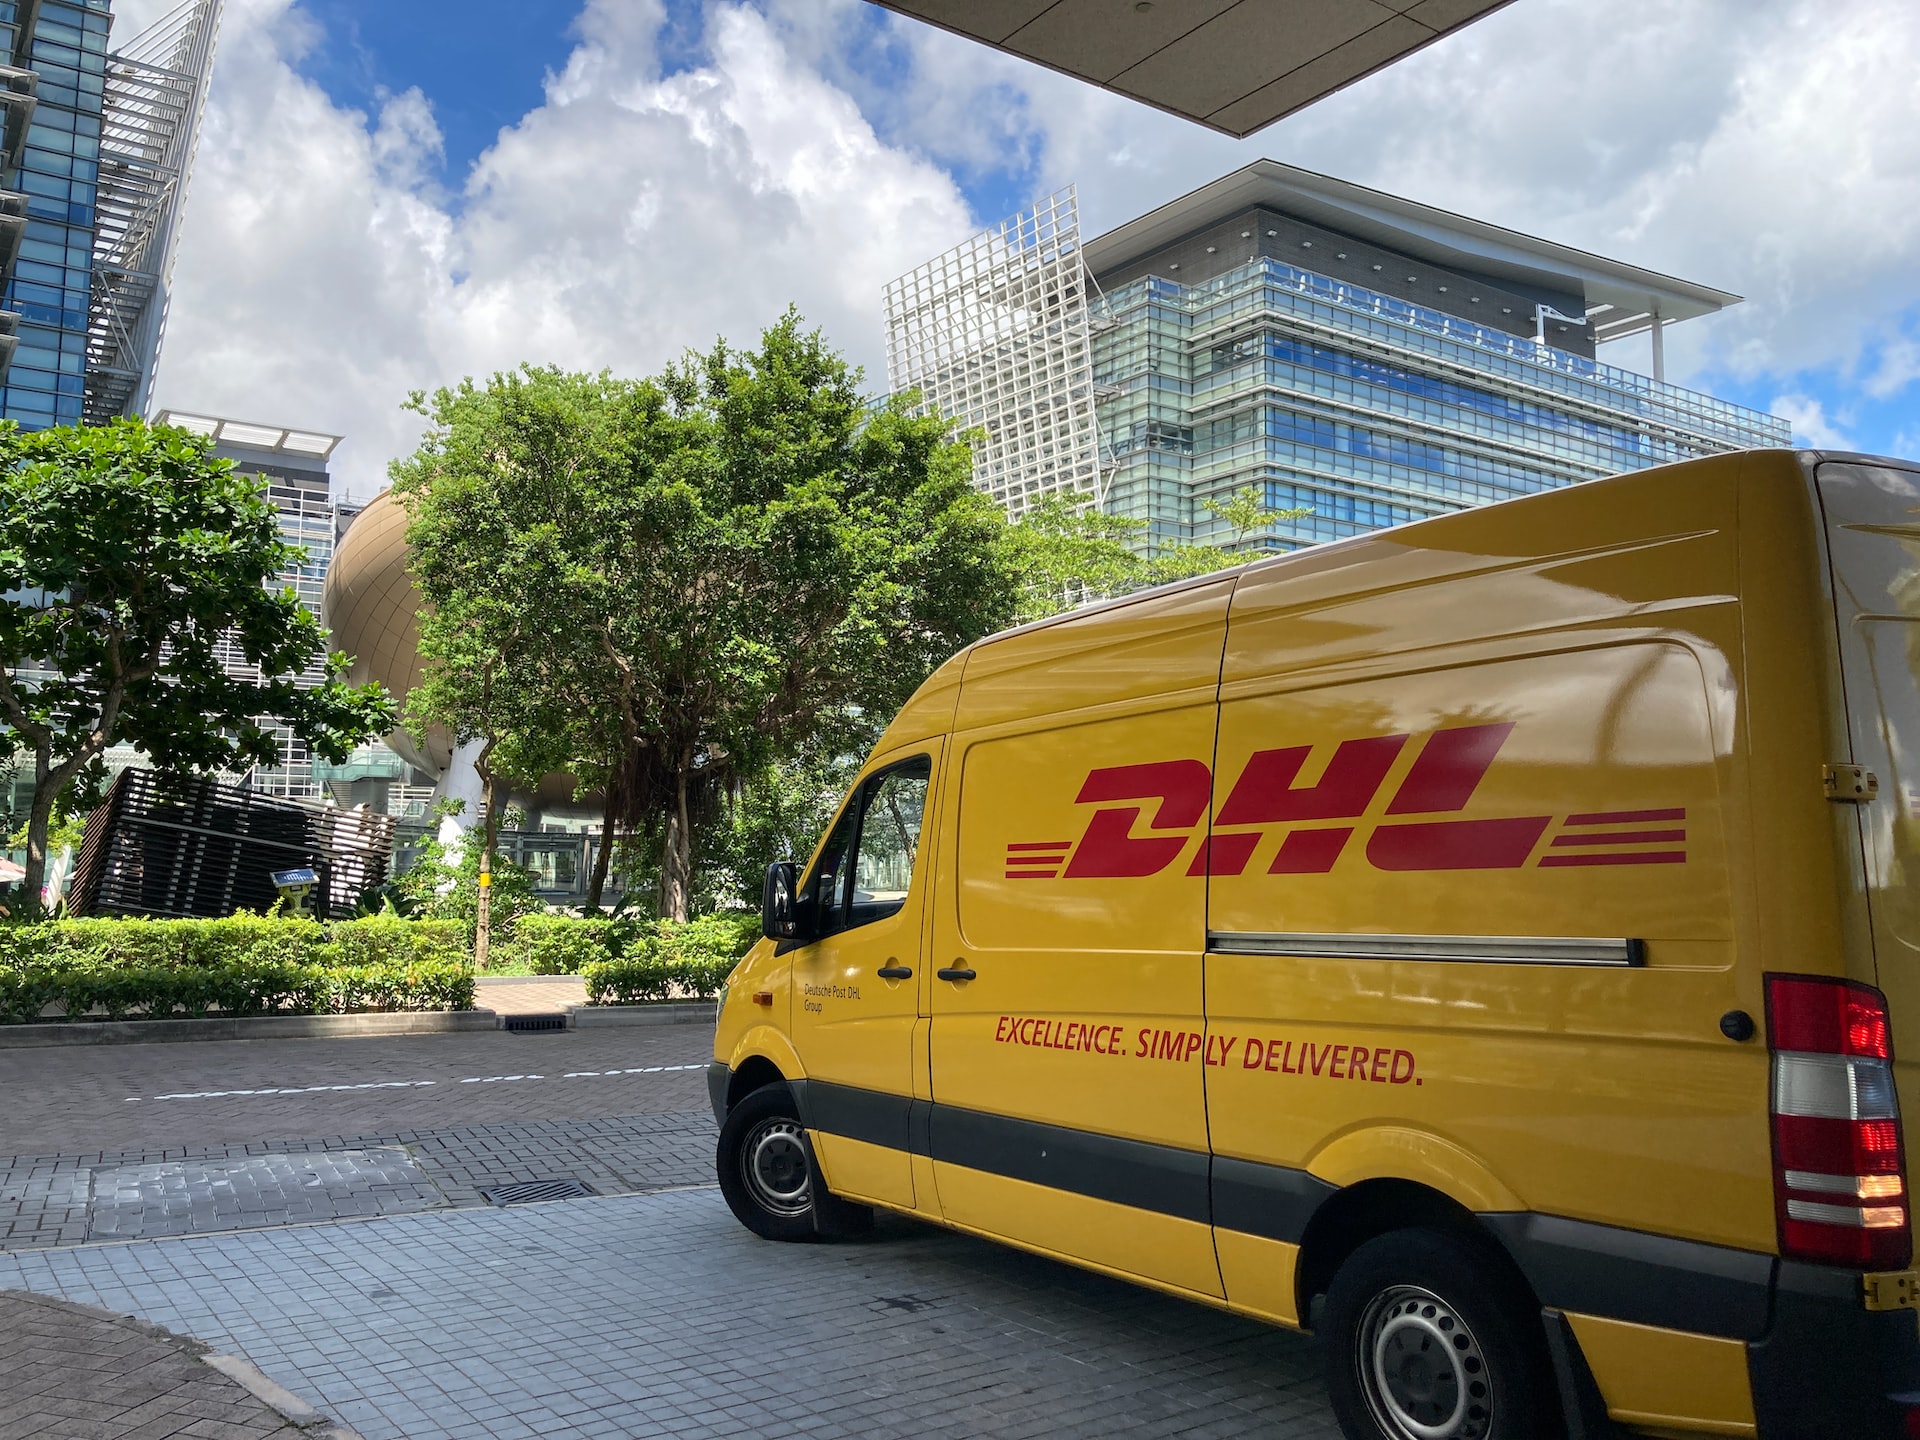 A yellow DHL van pulls out onto a street, there are high rise buildings in the background